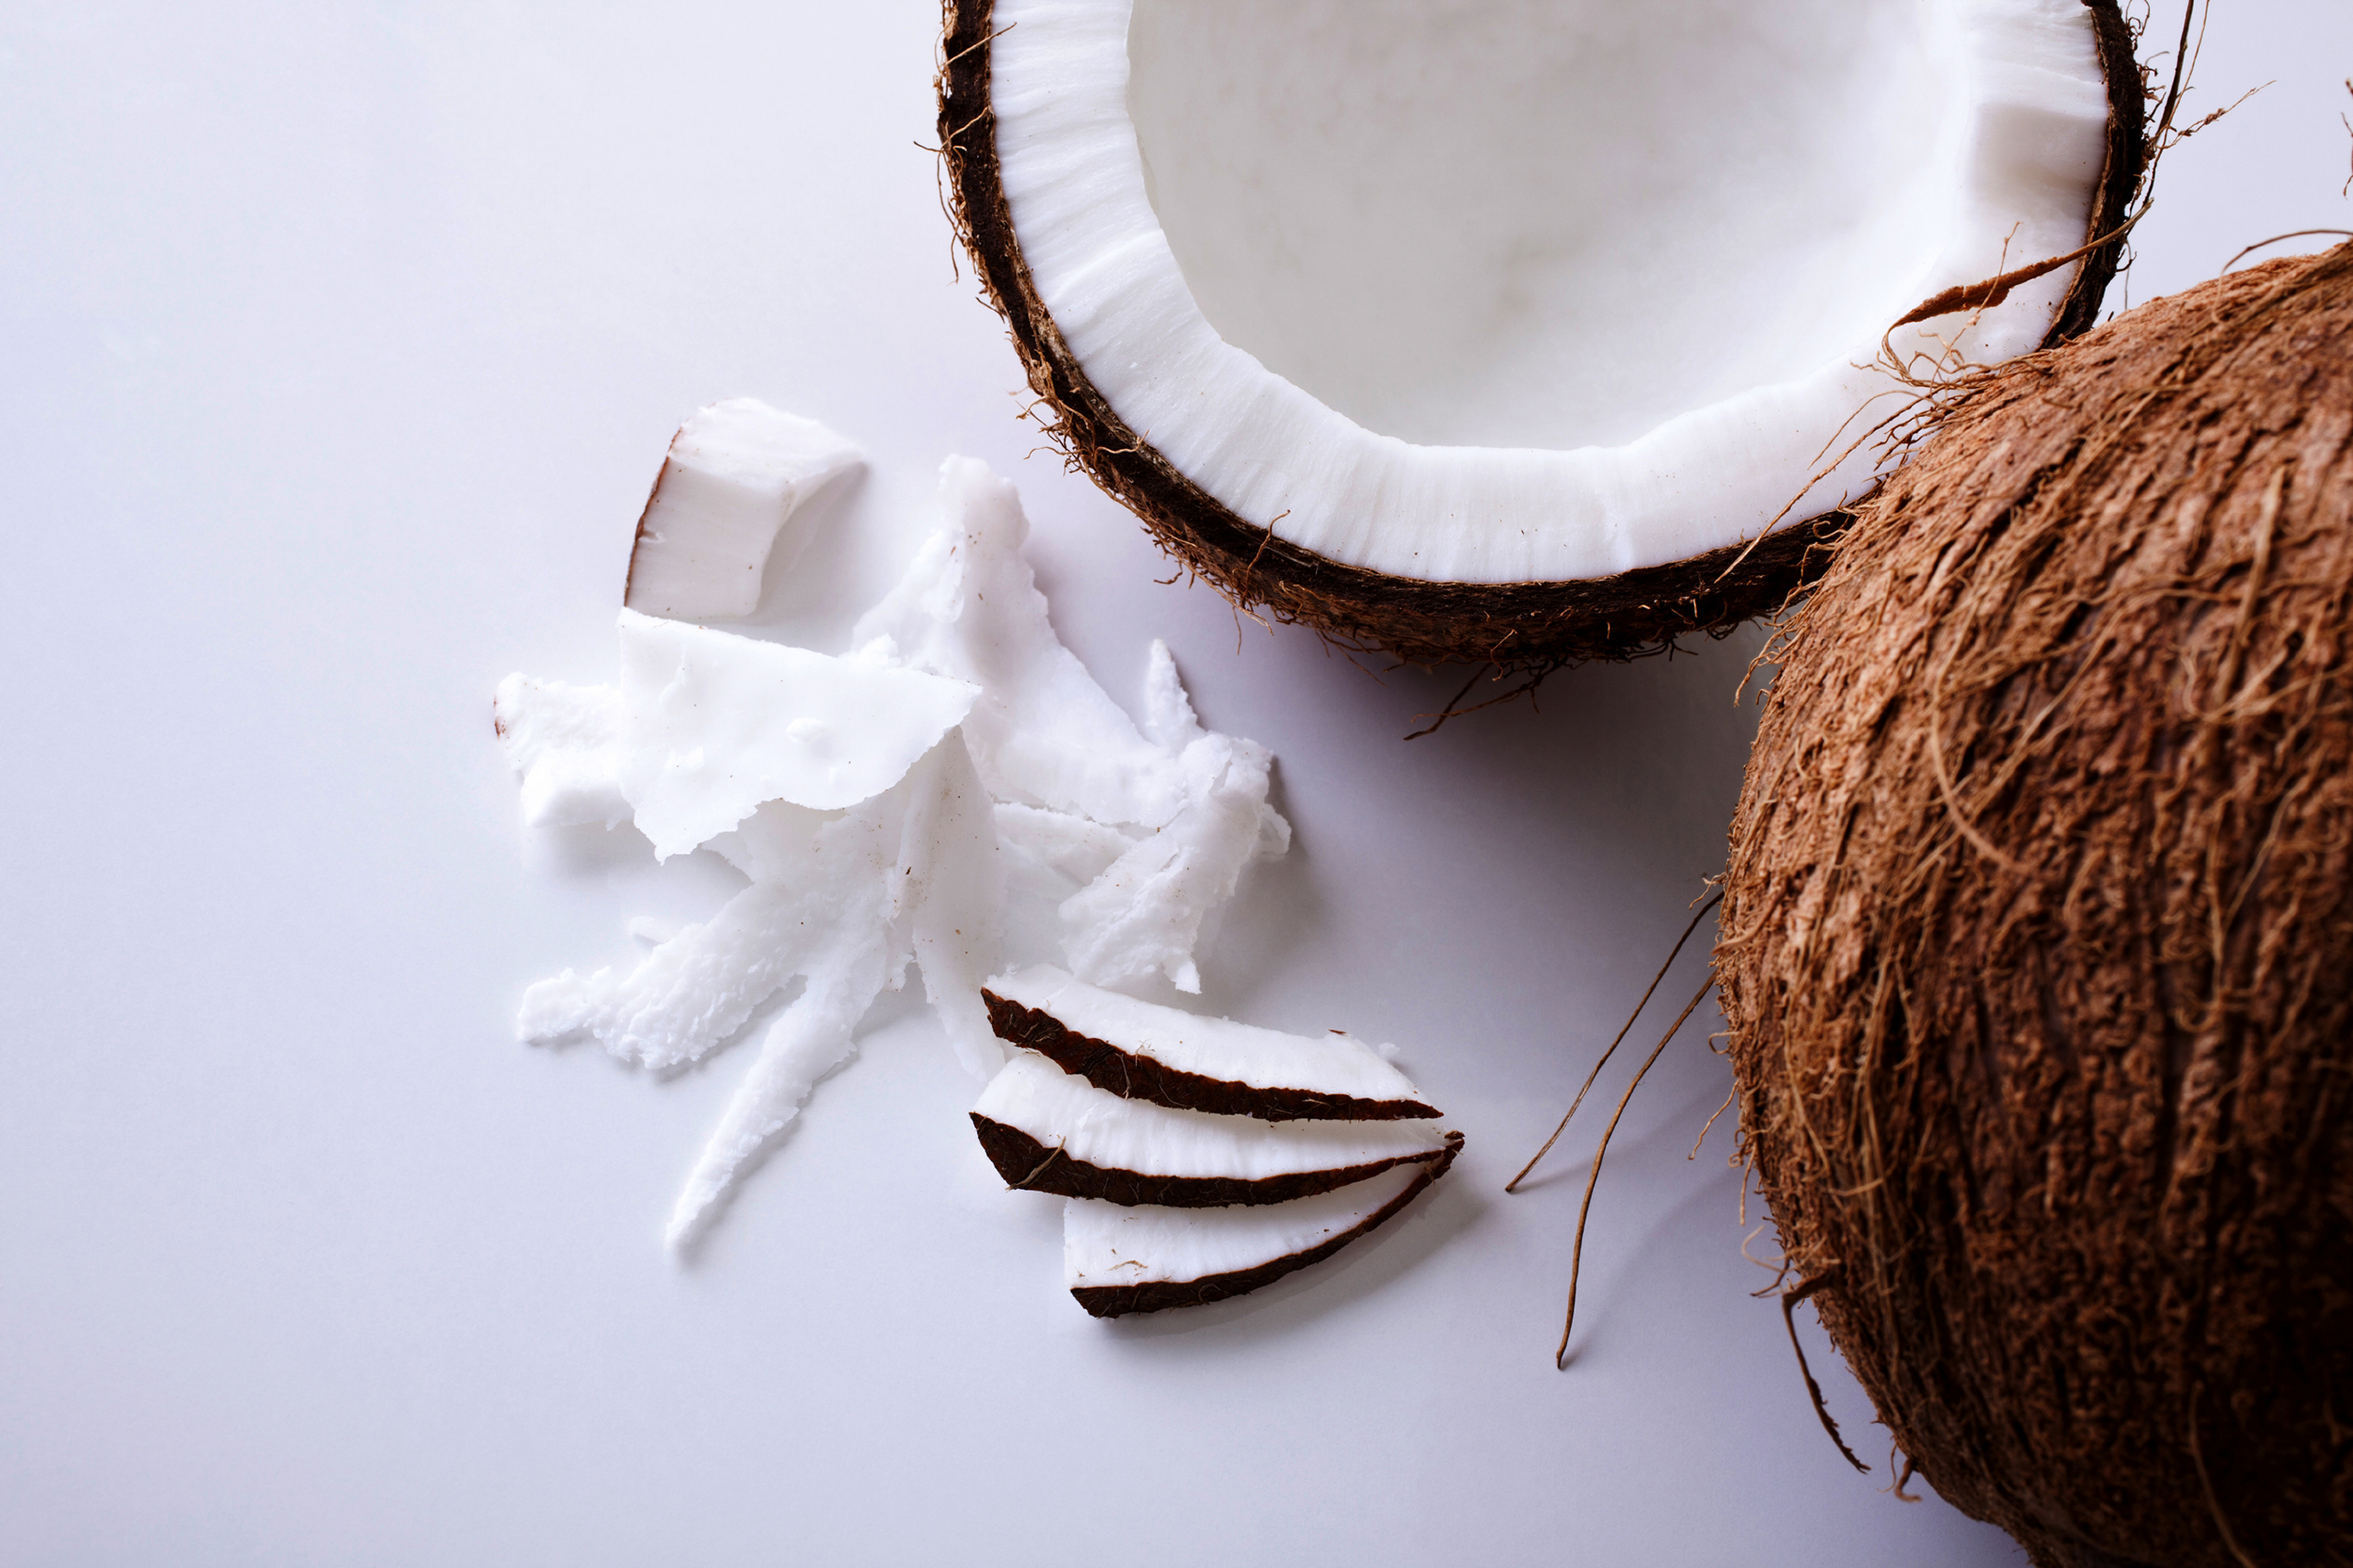 Body, Bath, or Kitchen: Coconut Oil is Your Best Friend